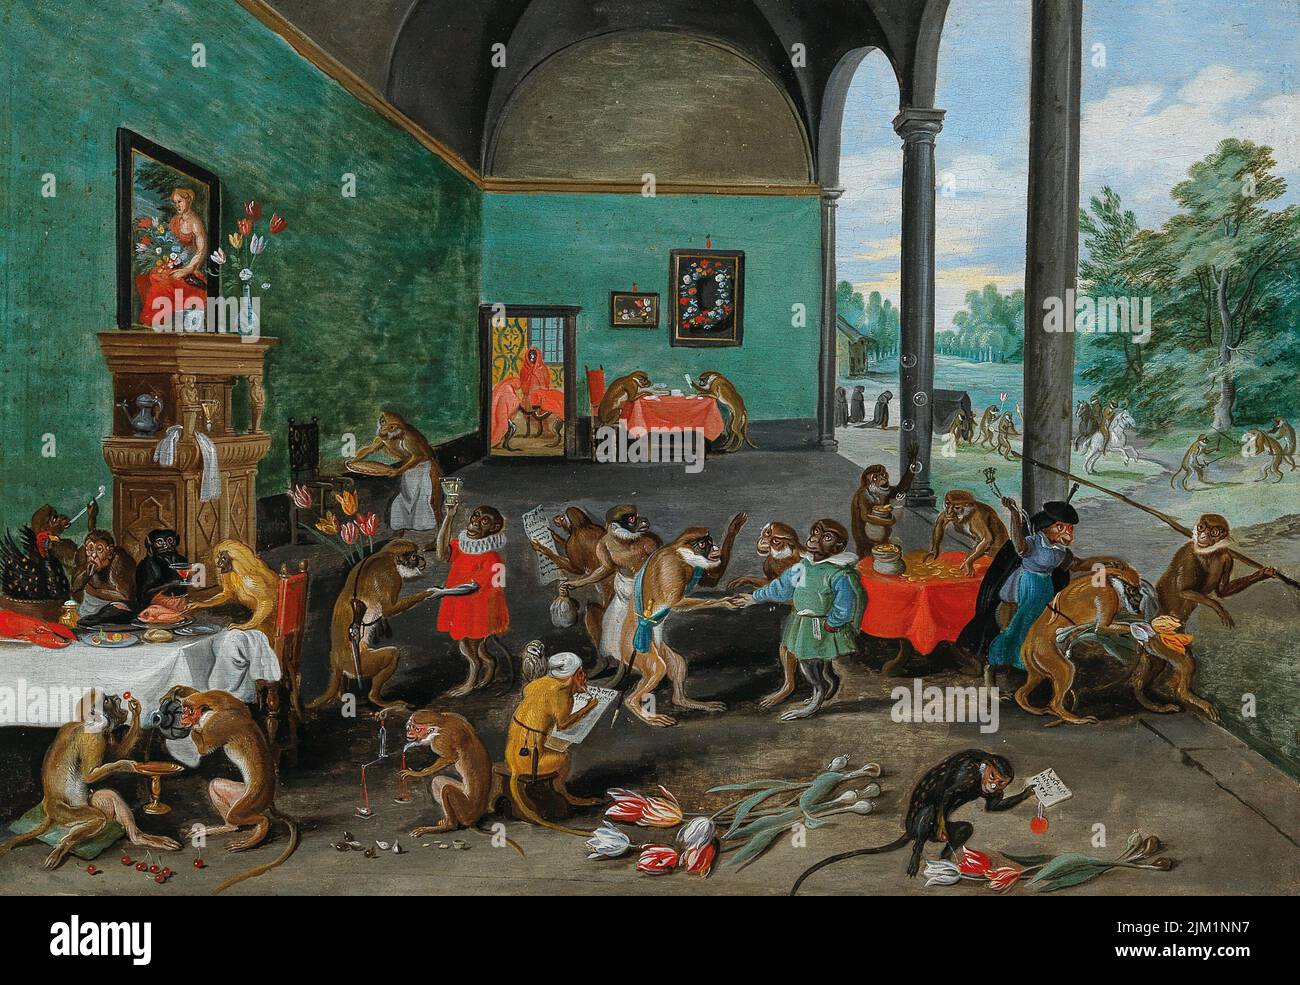 Allegory of Tulip Mania. Museum: PRIVATE COLLECTION. Author: Brueghel, Jan, the younger. Stock Photo